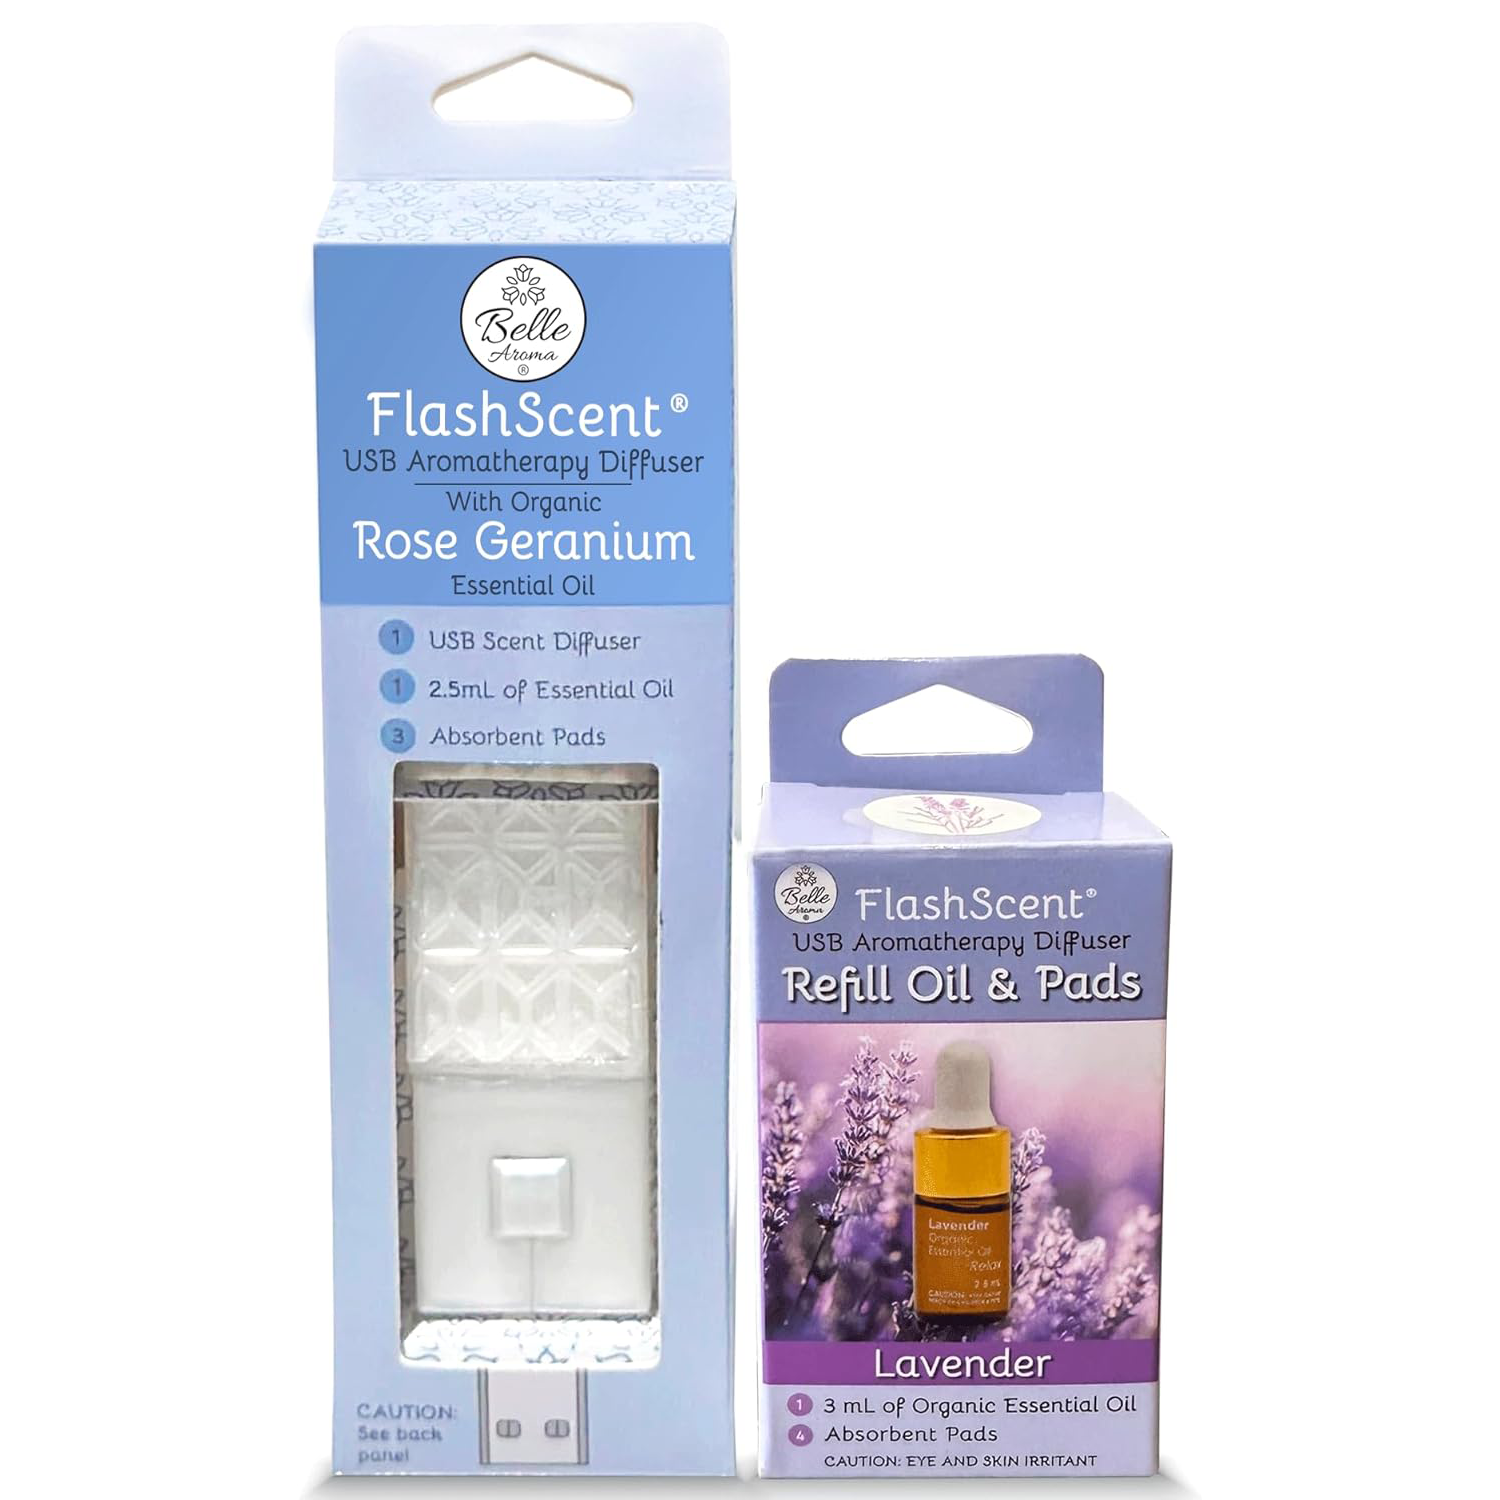 The FlashScent® USB Aromatherapy Essential Oil Diffuser Pearl White With Rose Geranium Diffuser + Flashscent Refill Oil 3.5ml and 4 Pads aromatherapy